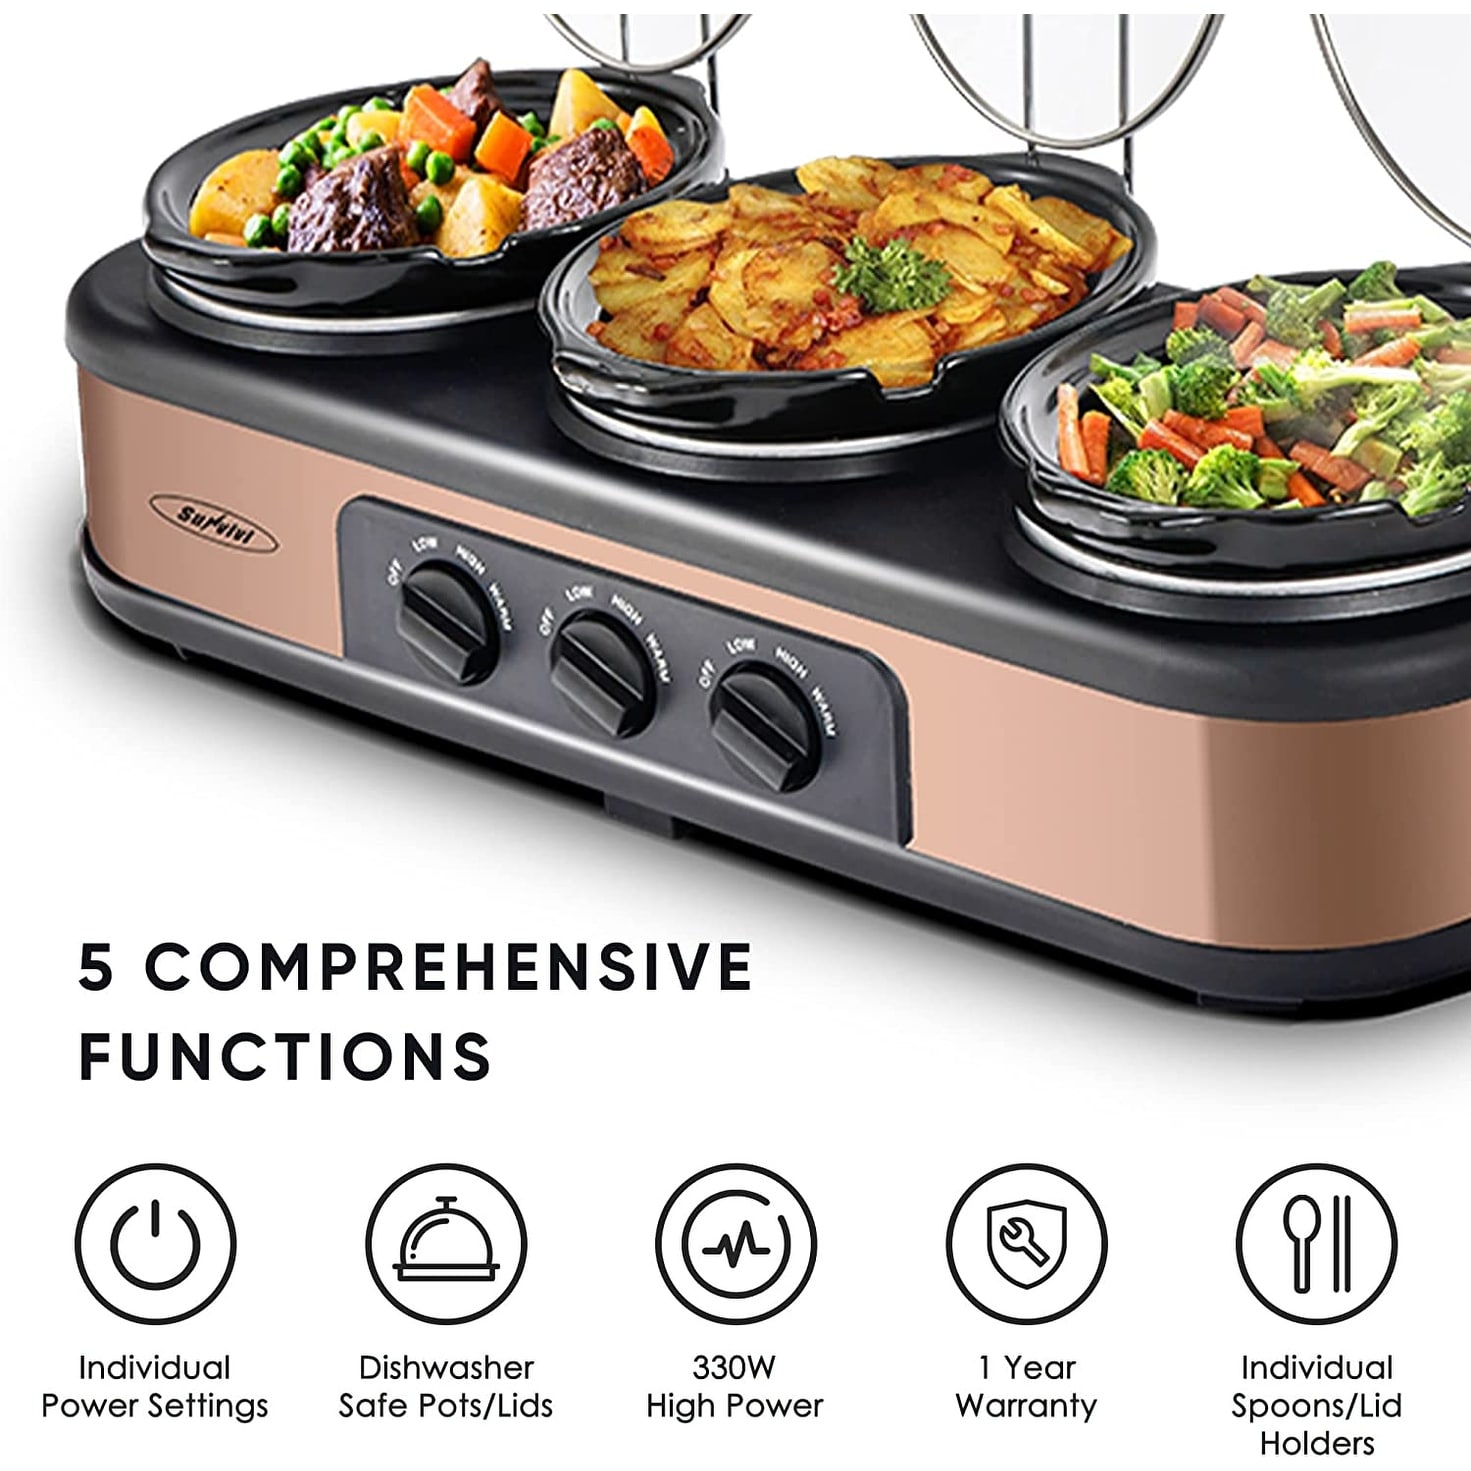 https://ak1.ostkcdn.com/images/products/is/images/direct/2a833d6d3e91c2f2f8dd0bc93560388275868228/Slow-Cooker%2C-Triple-Slow-Cooker-Buffet-Server-3-Pot-Food-Warmer%2C-3-Section-1.5-Quart-Oval-Slow-Cooker-Buffet-Food-Warmer.jpg